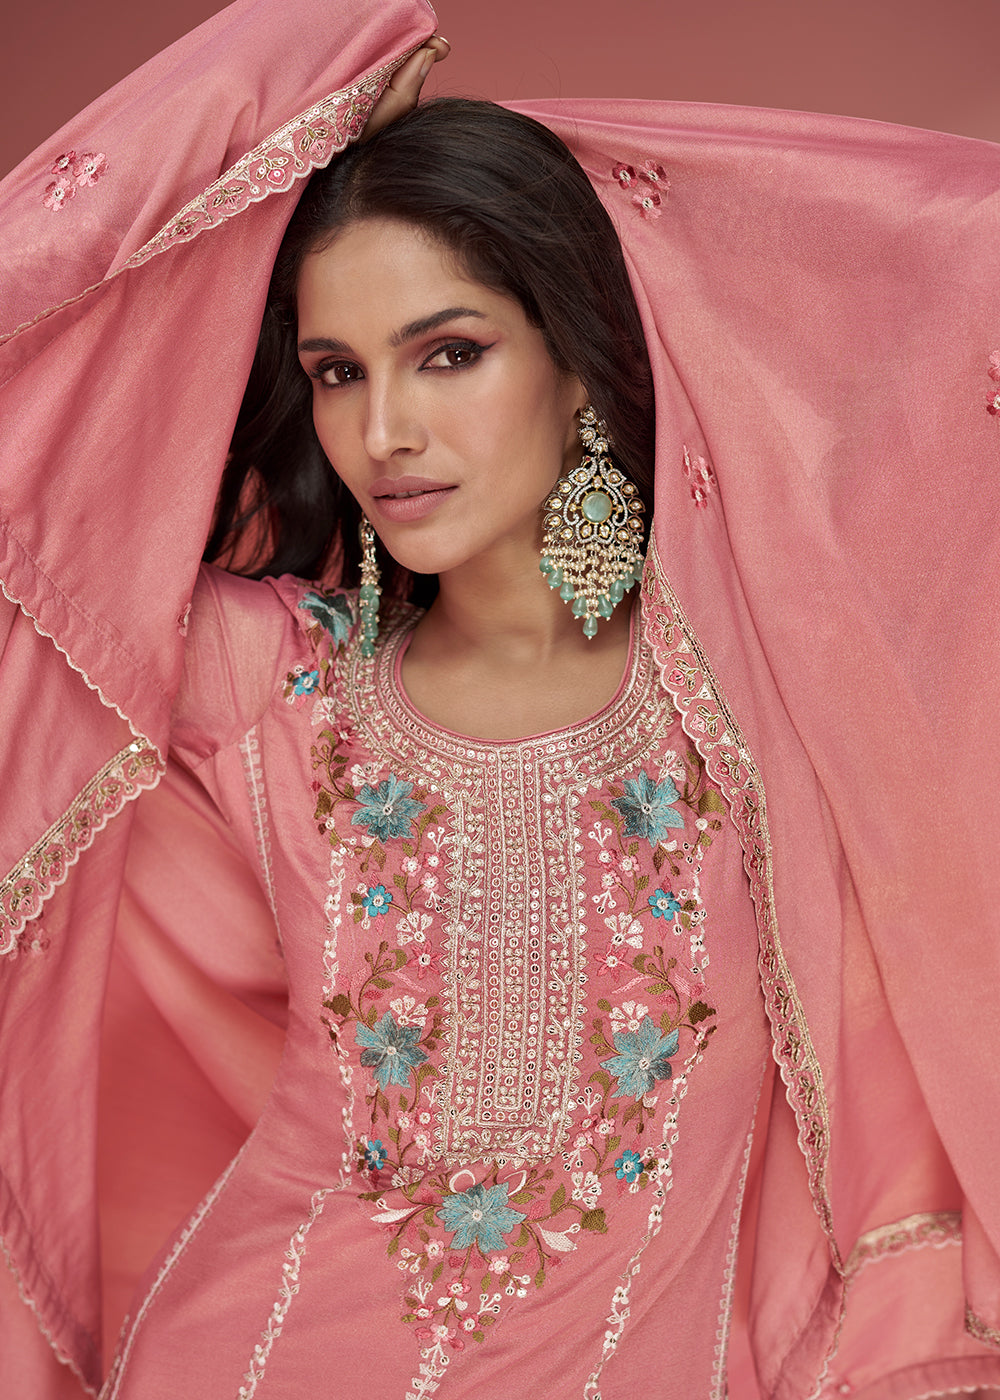 Buy Now Pink Organza Simar Silk Embroidered Palazzo Style Suit Online in USA, UK, Canada, Germany, Australia & Worldwide at Empress Clothing.